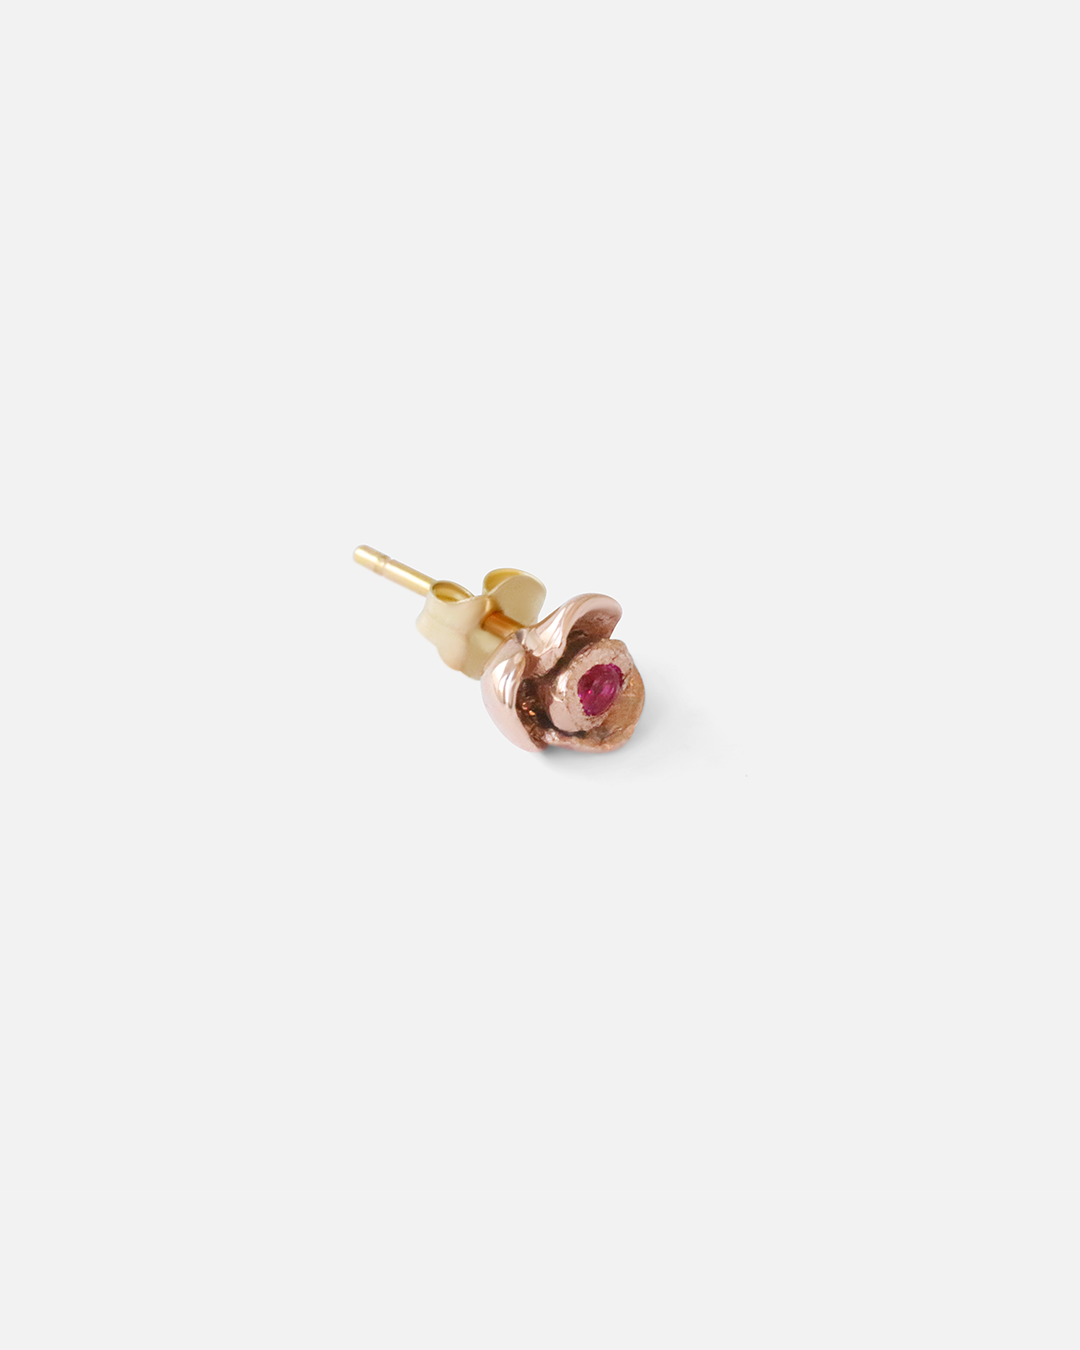 Rose Stud / Ruby By Young Sun Song in earrings Category